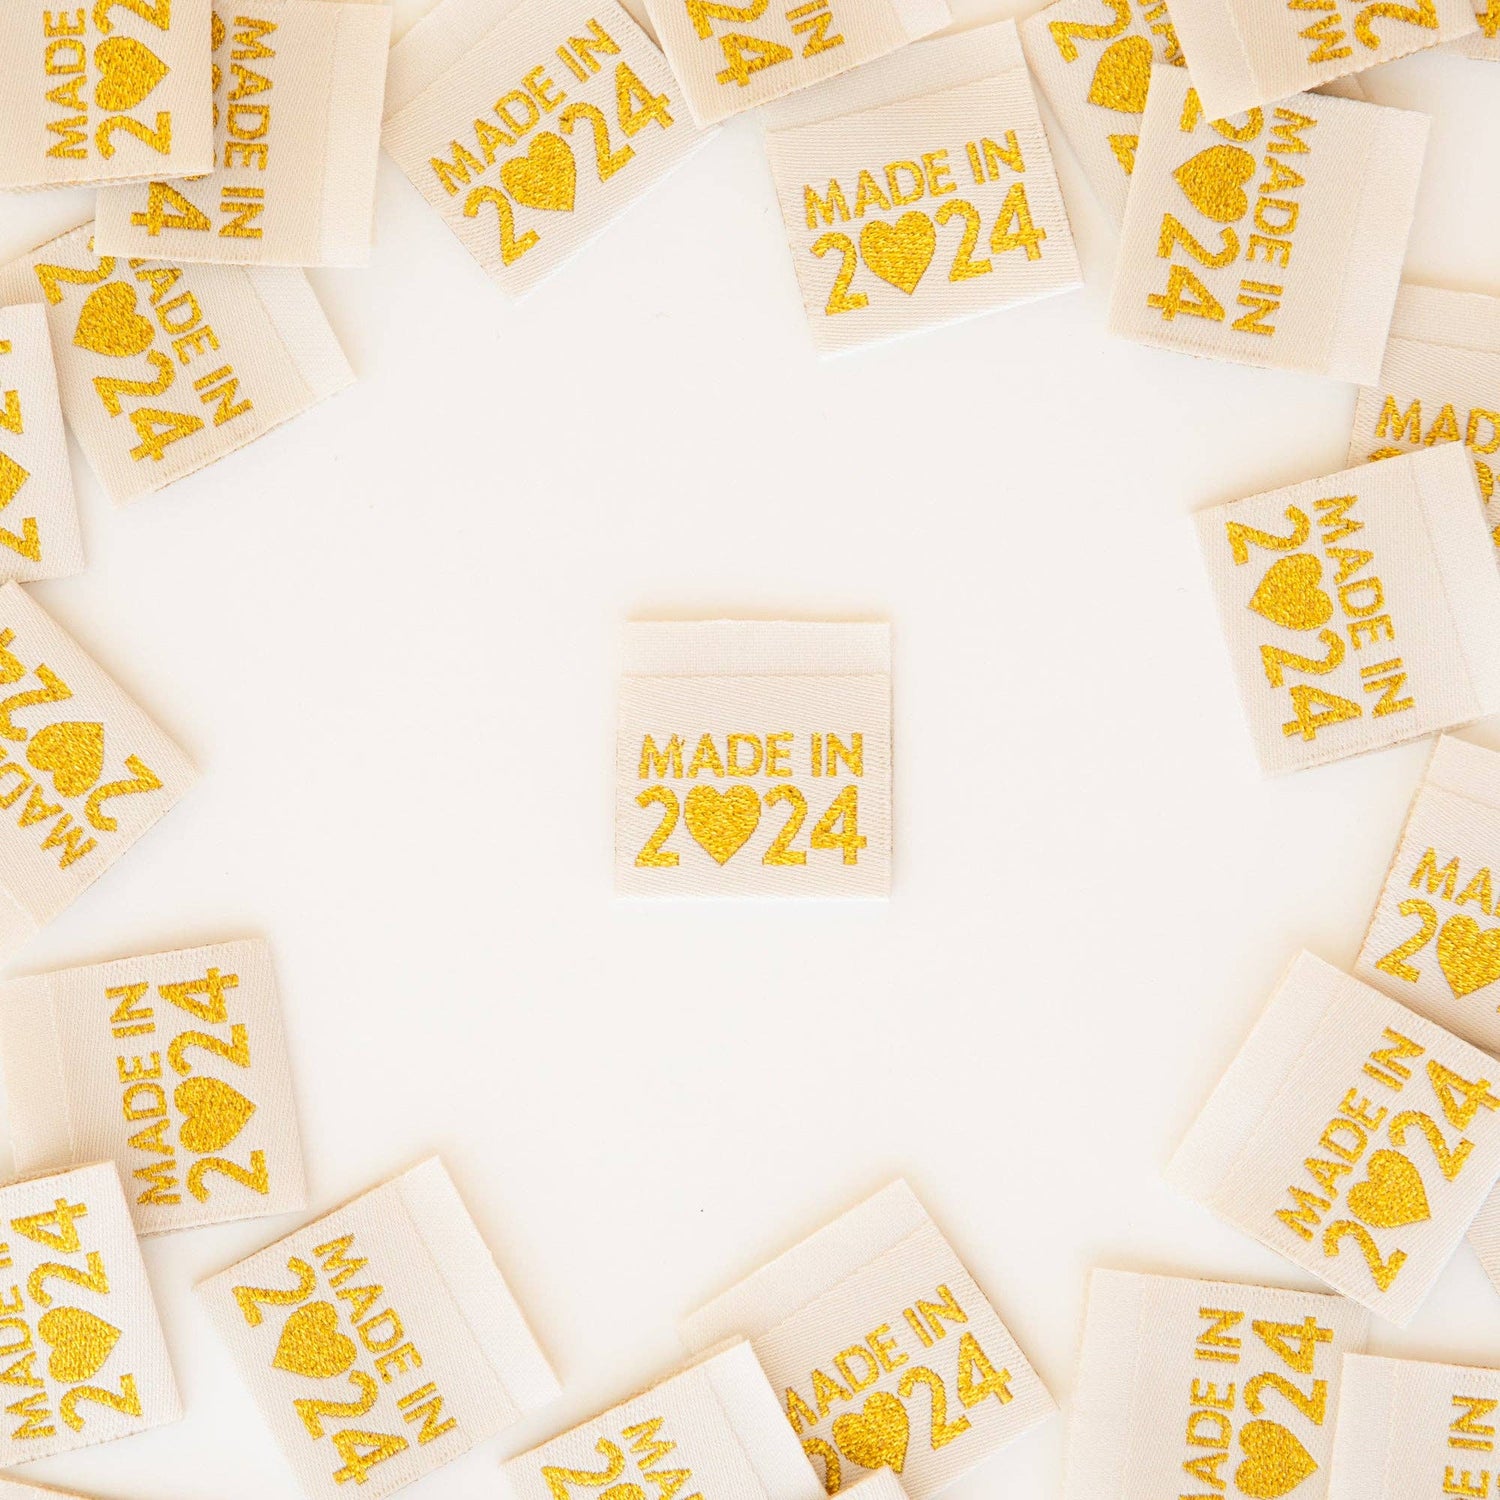 &quot;Made in 2024&quot; - Sarah Hearts - Sew In Labels